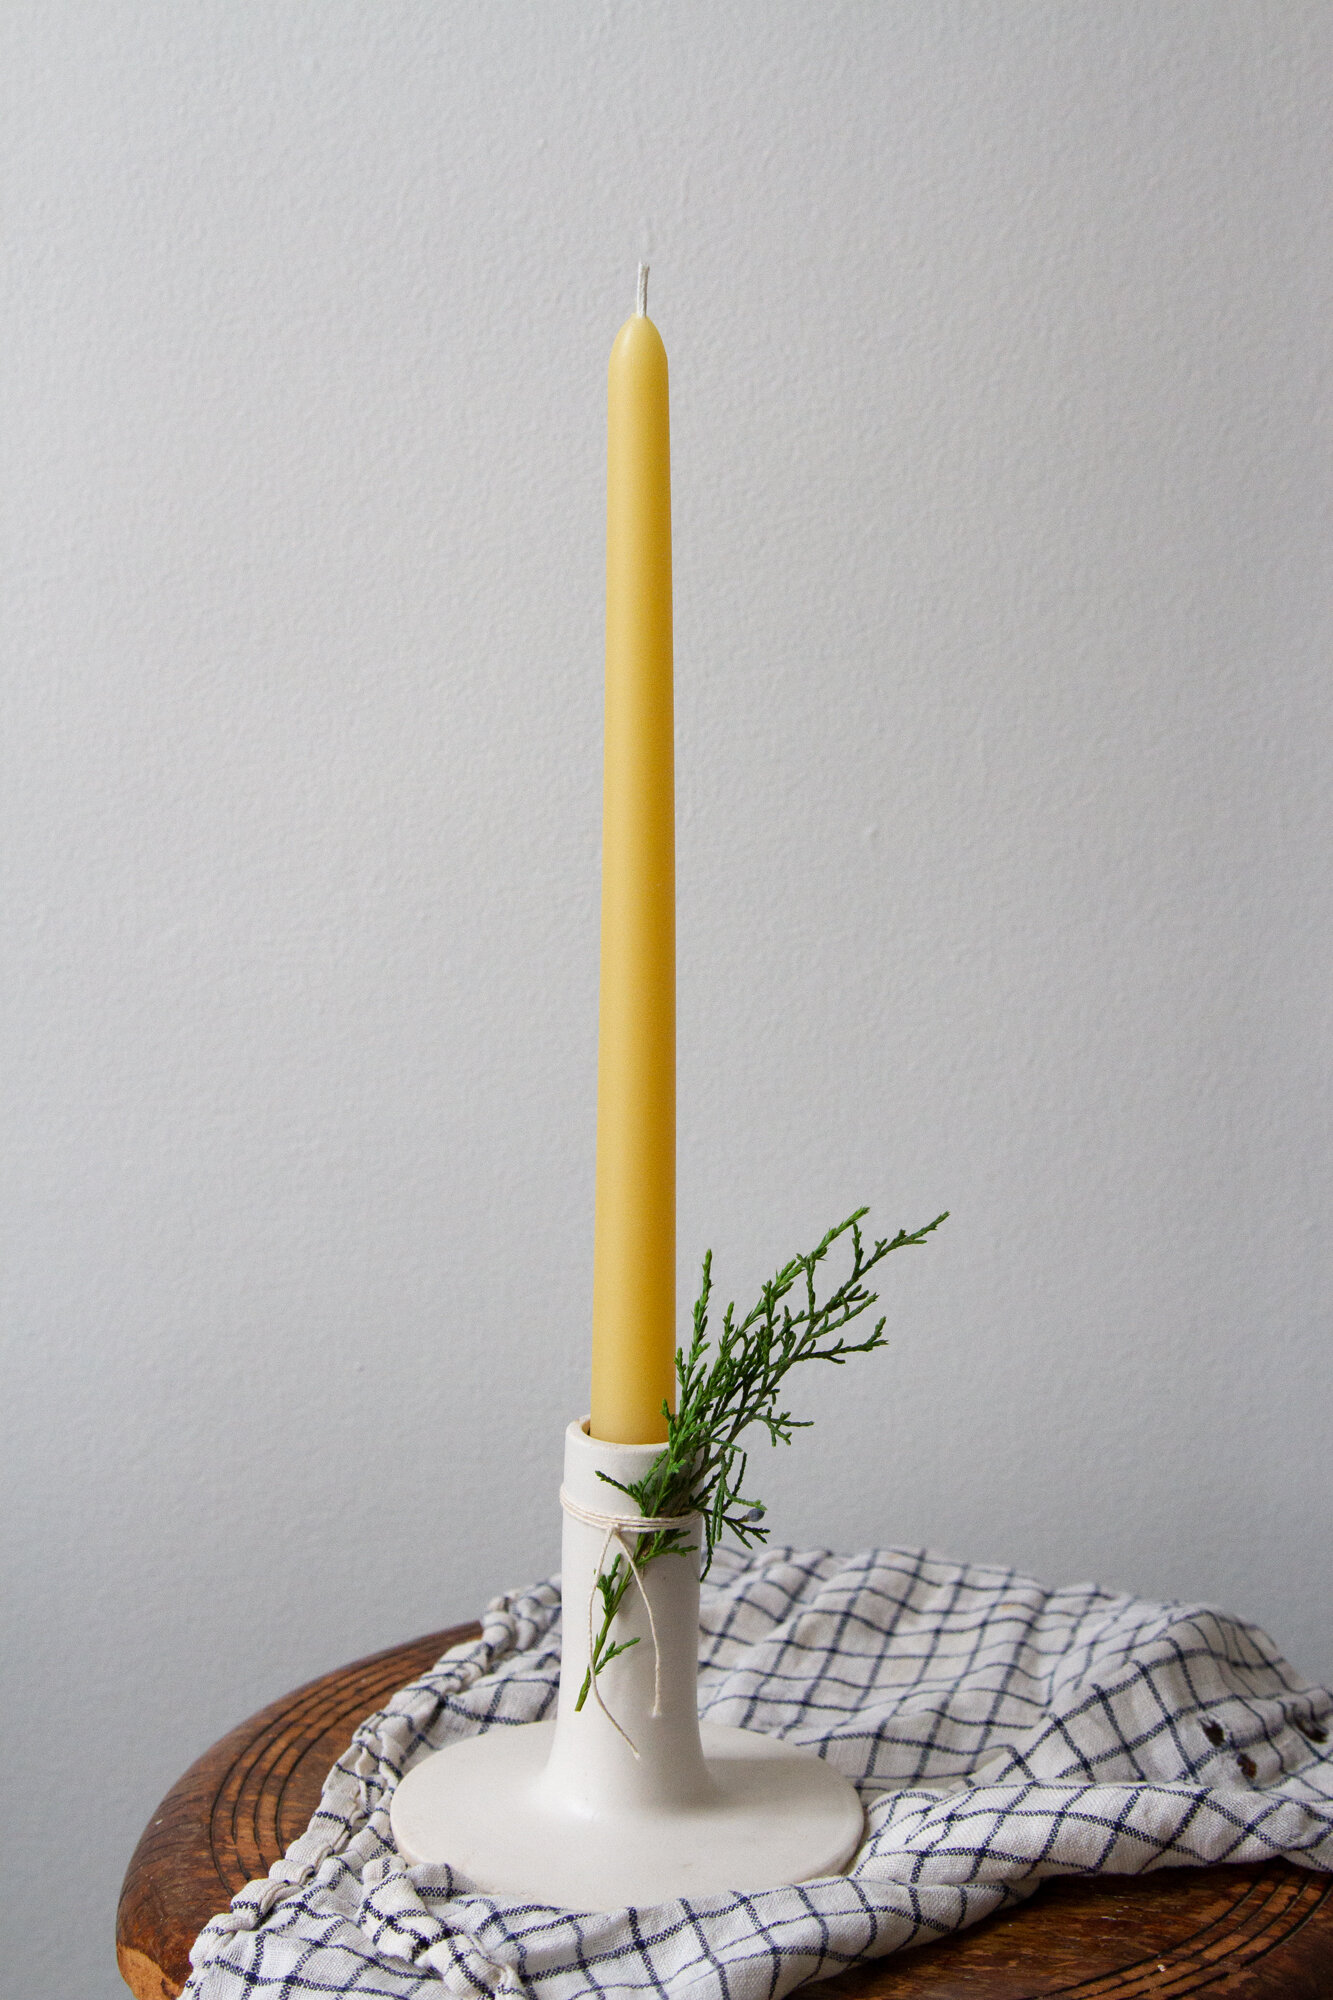 How to Make Beeswax Candles - Tips and Tricks from an Expert Candlemaker